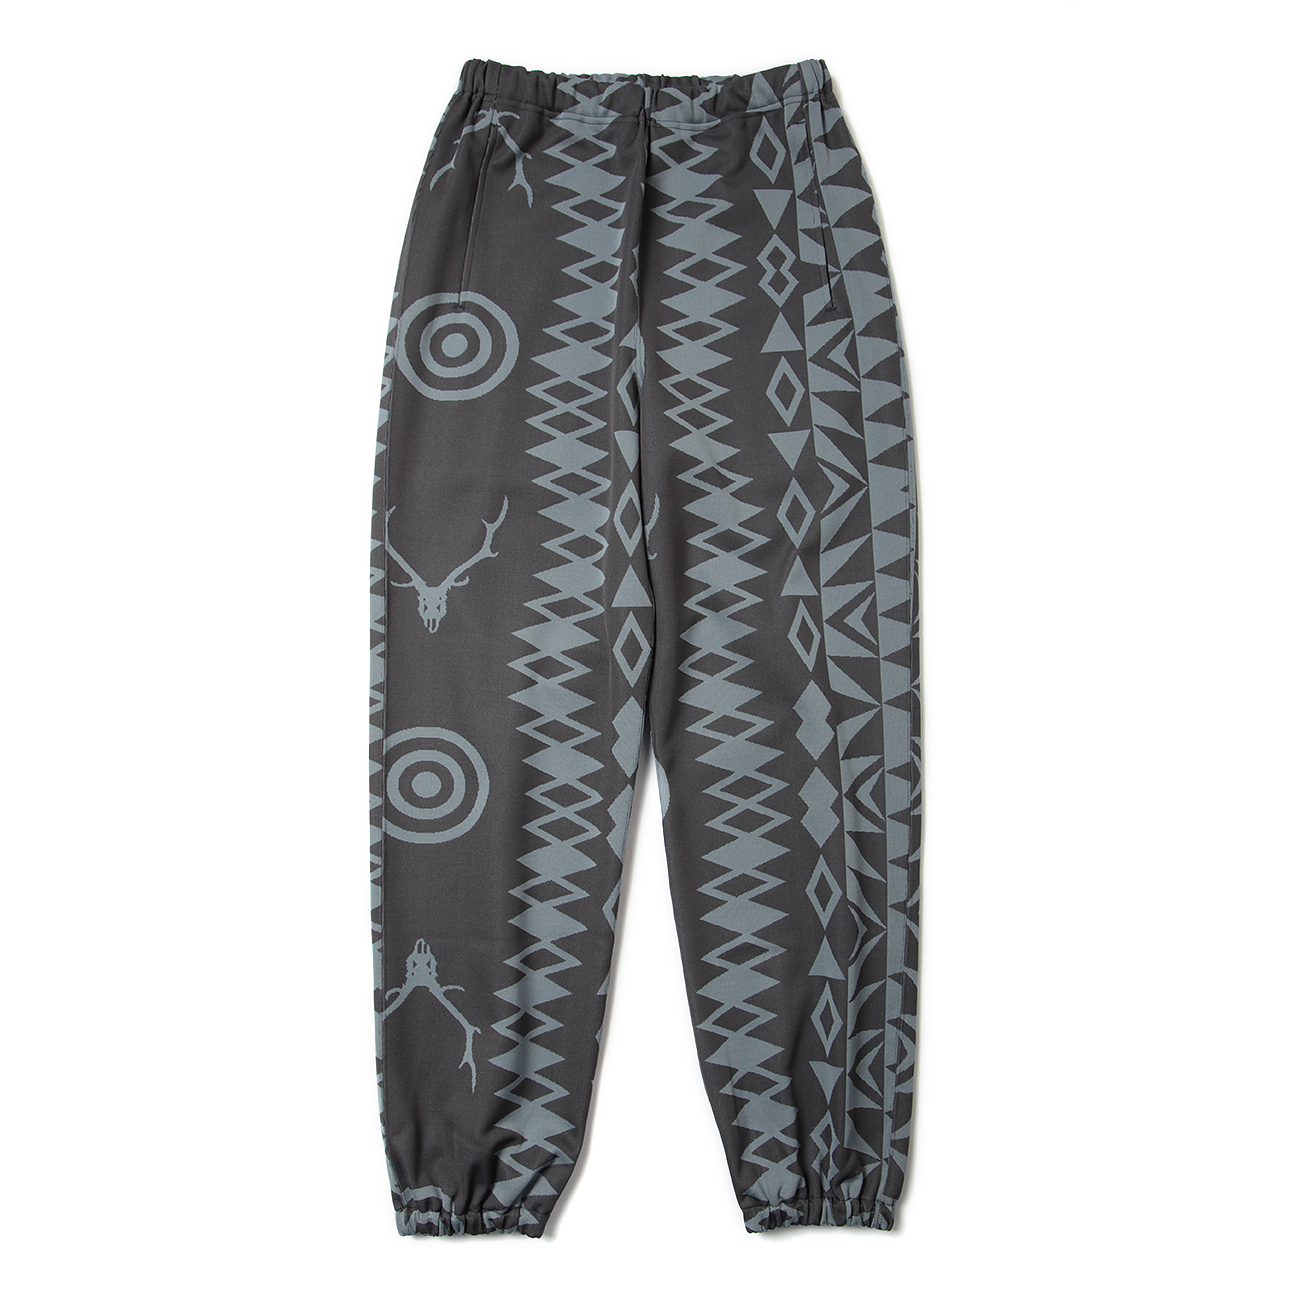 String Sweat Pant - Poly Jq. / Native S&T - Charcoal